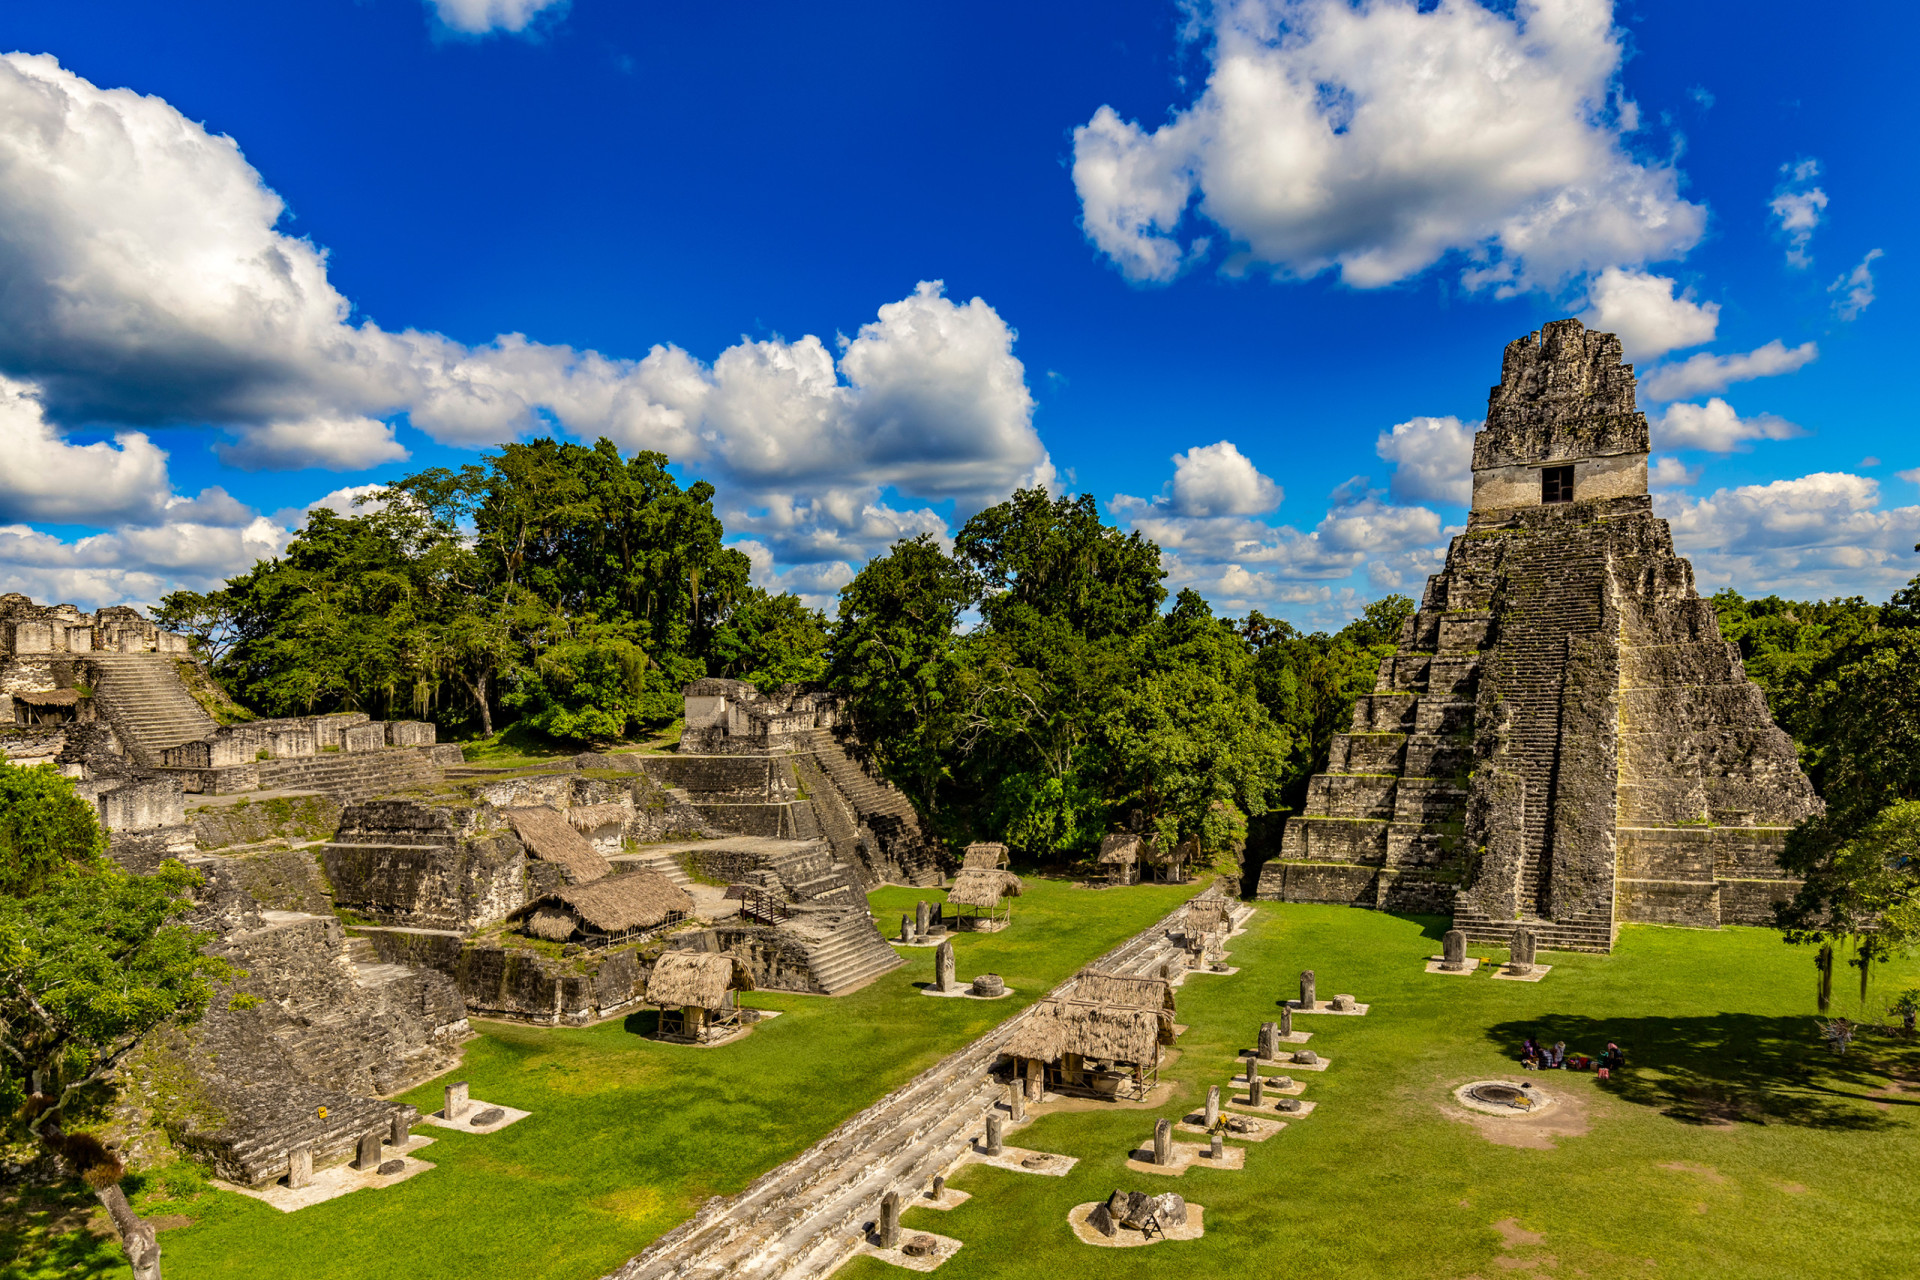 <p>If history and culture is your thing, head out to Tikal National Park. This ancient Mayan citadel surrounded by the rainforests of northern Guatemala is deserving of its status as a UNESCO World Heritage Site. For the record, Tika contains the tallest pre-Columbian structure in the Americas.</p>